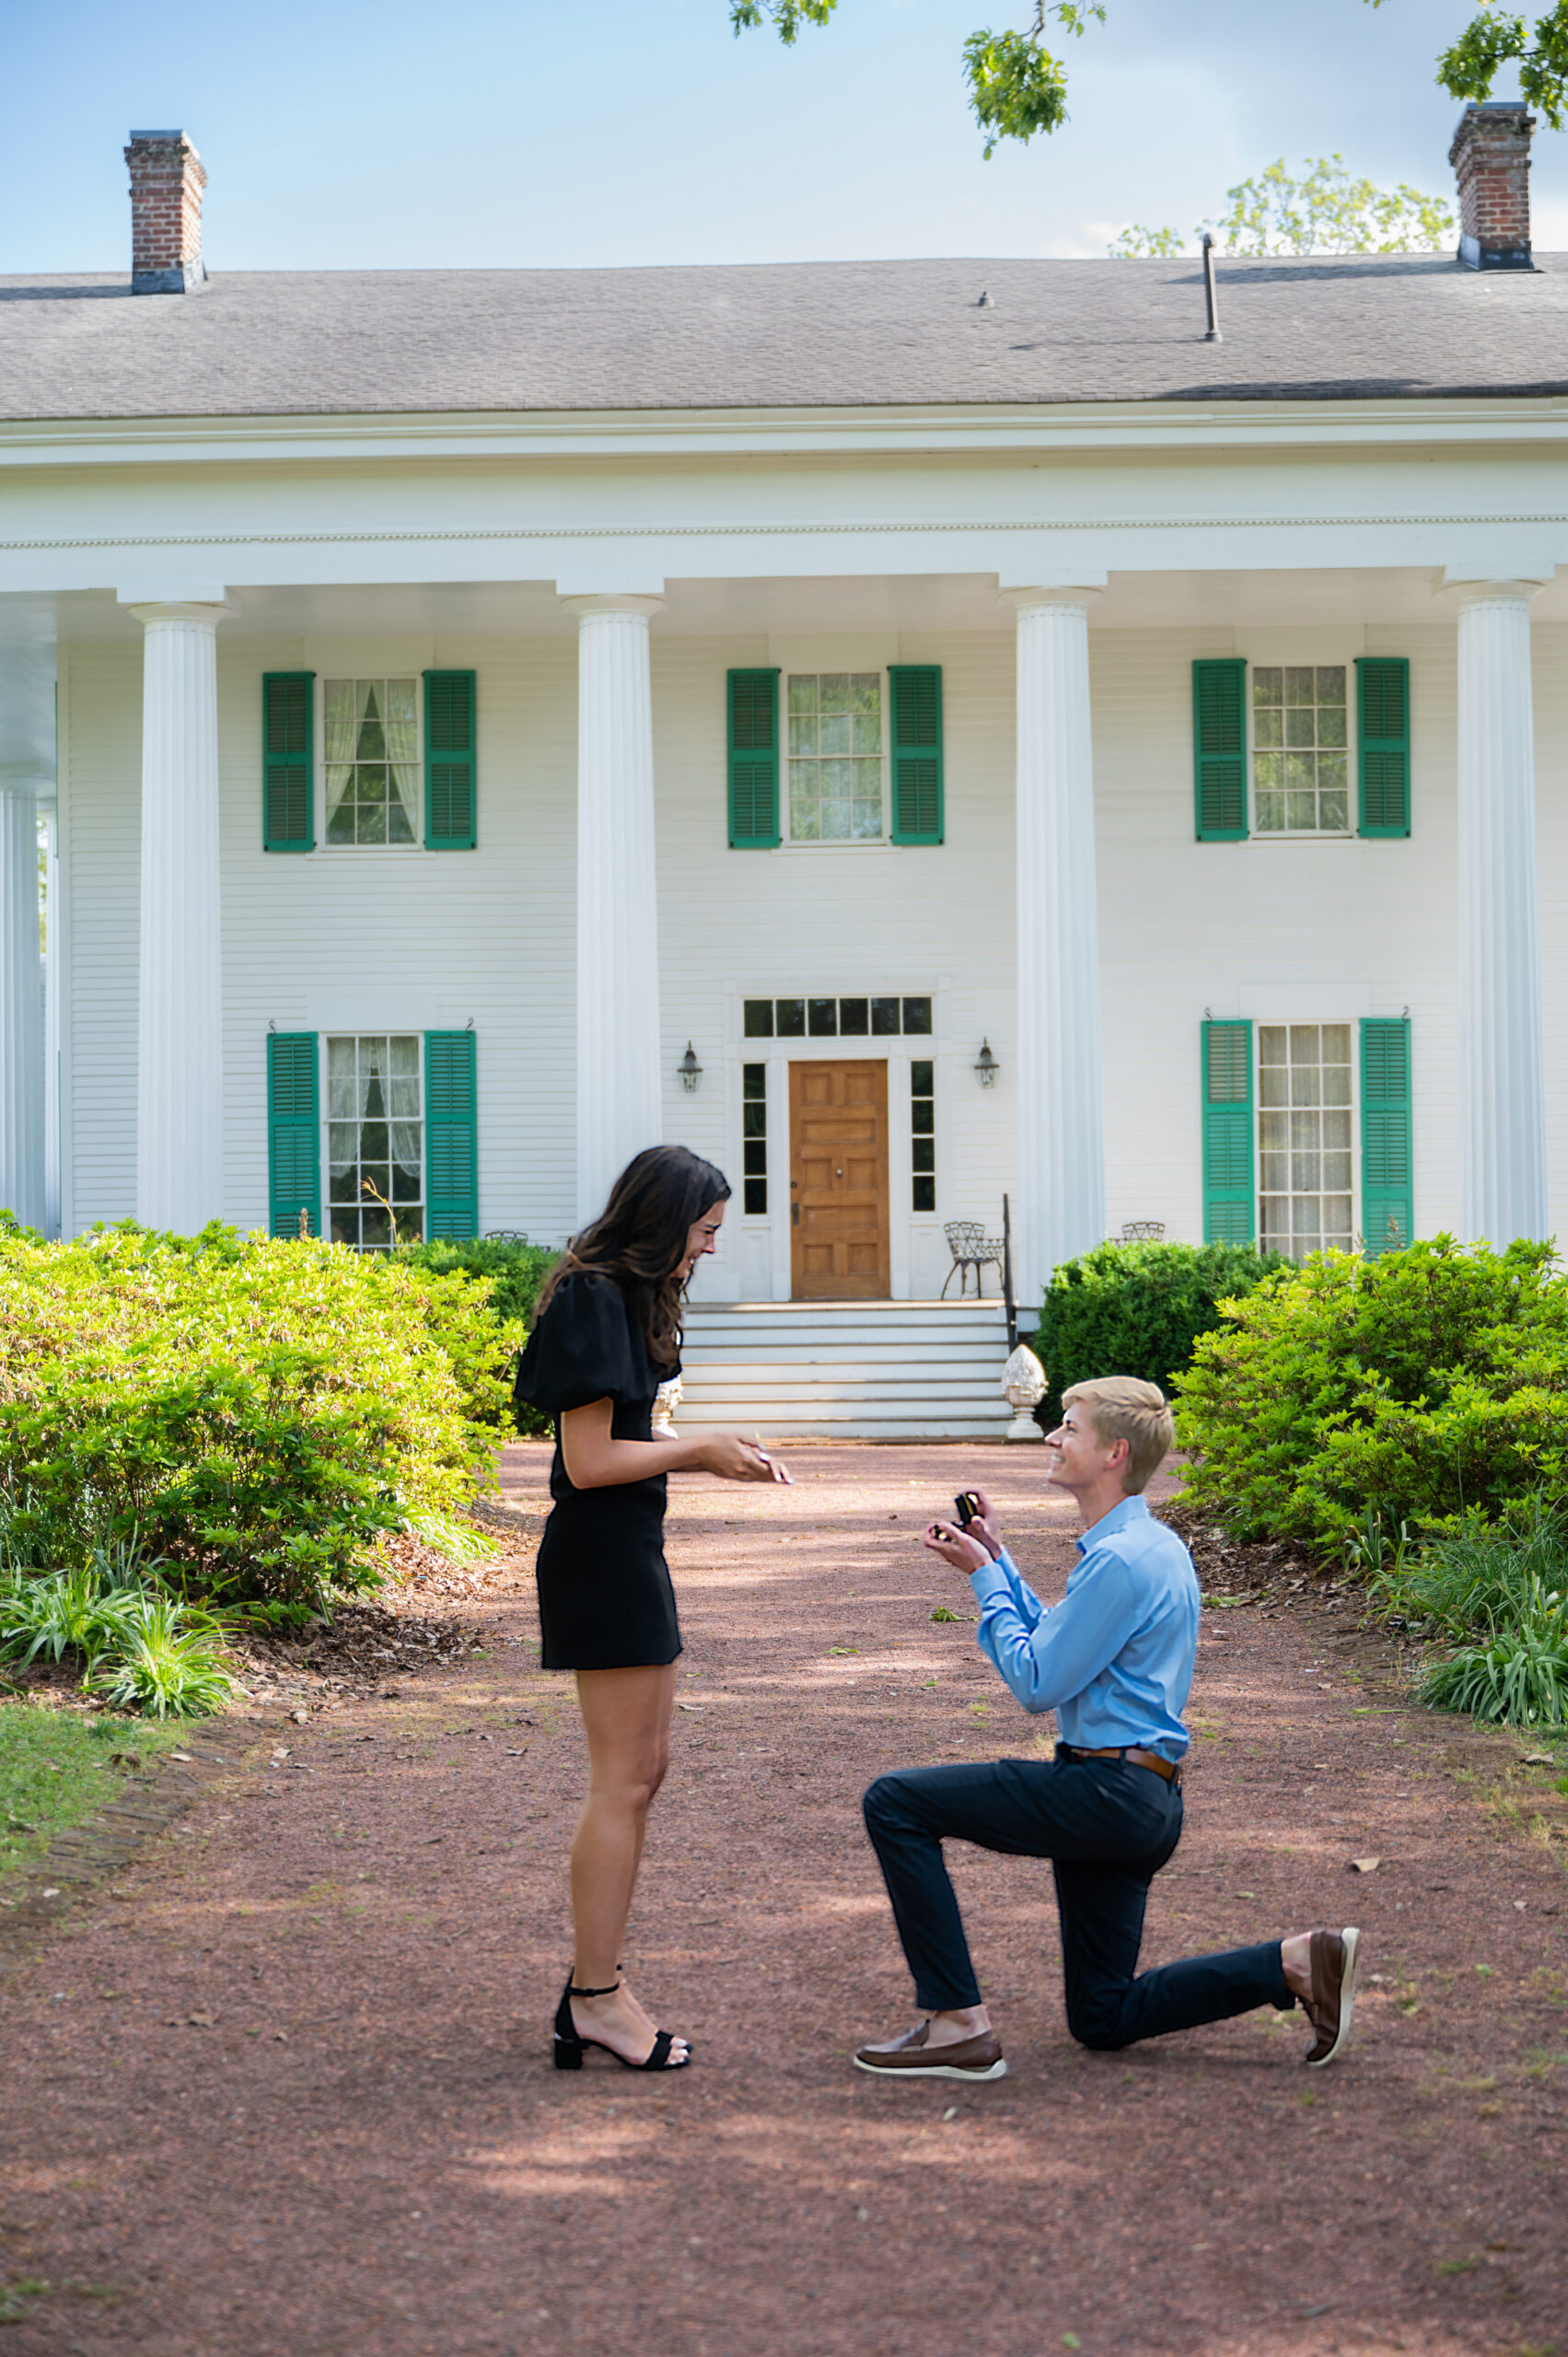 Roswell Proposal, Roswell Proposal Photographer, Roswell Proposal Location, Atlanta Proposal Photographer, Atlanta Proposal Photography, Atlanta Proposal Photography Location, Atlanta Engagement Photographer, Atlanta Engagement Location, Atlanta Wedding Photographer, Atlanta Wedding Photography, Atlanta Wedding Venue, Roswell Weddings, North Atlanta Proposal, North Georgia Proposal